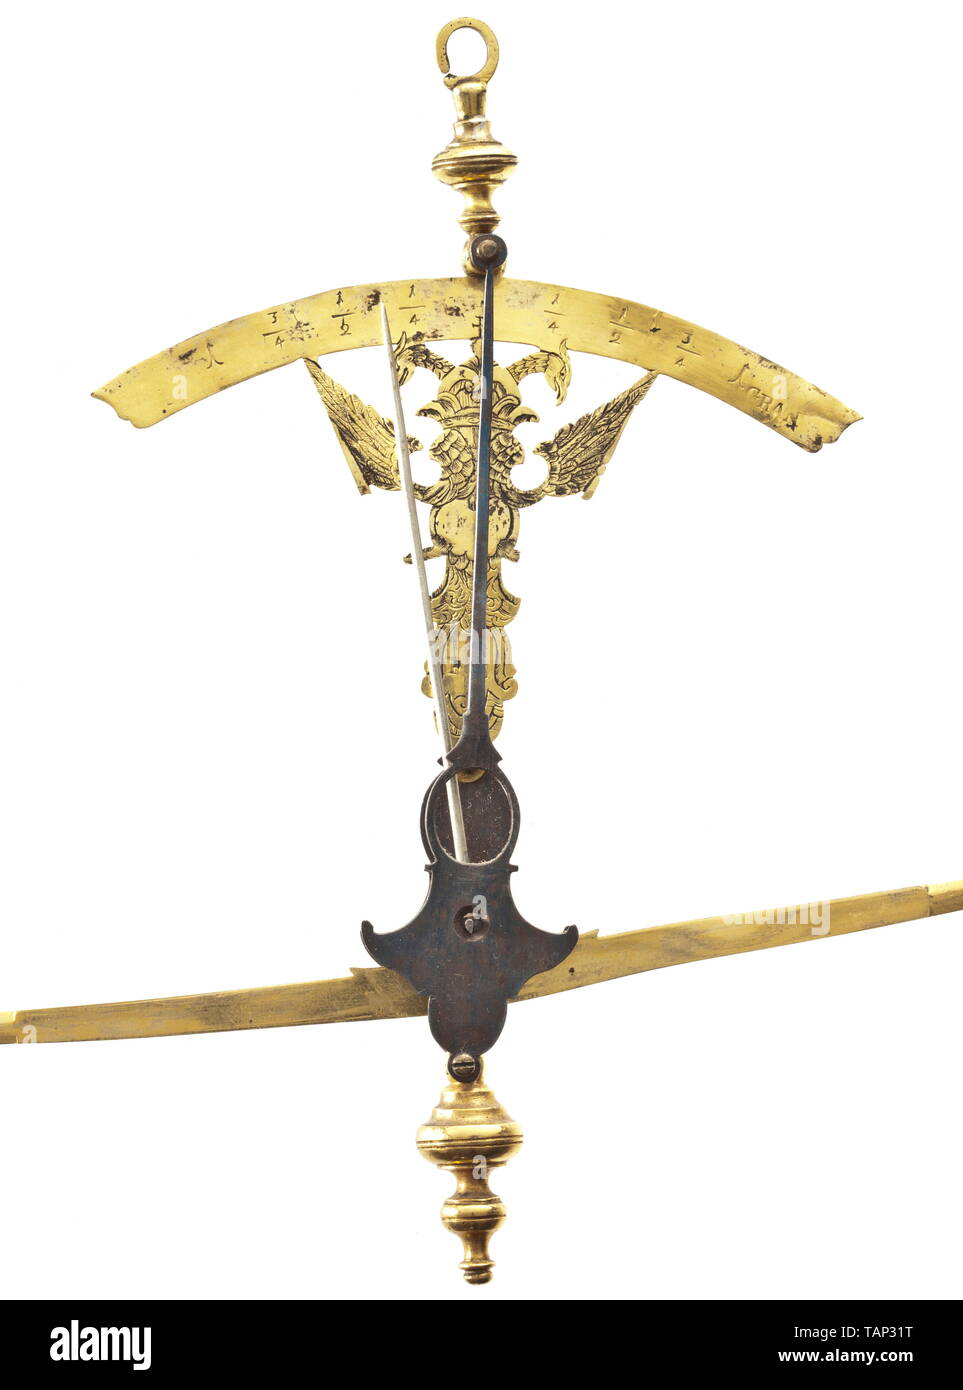 A pair of German jeweller's or coin scales, circa 1700 Openworked and engraved double-headed eagle with a semicircular, fire-gilt brass scale, the lower section stamped 'F M'. The screw-mounted, blued iron bracket with attached, gilded balance beam, the two balancing pans each bearing a stamped lion's mark. The strings are a later replacement. Width 16.7 cm. historic, historical, handicrafts, handcraft, craft, object, objects, stills, clipping, clippings, cut out, cut-out, cut-outs, Additional-Rights-Clearance-Info-Not-Available Stock Photo